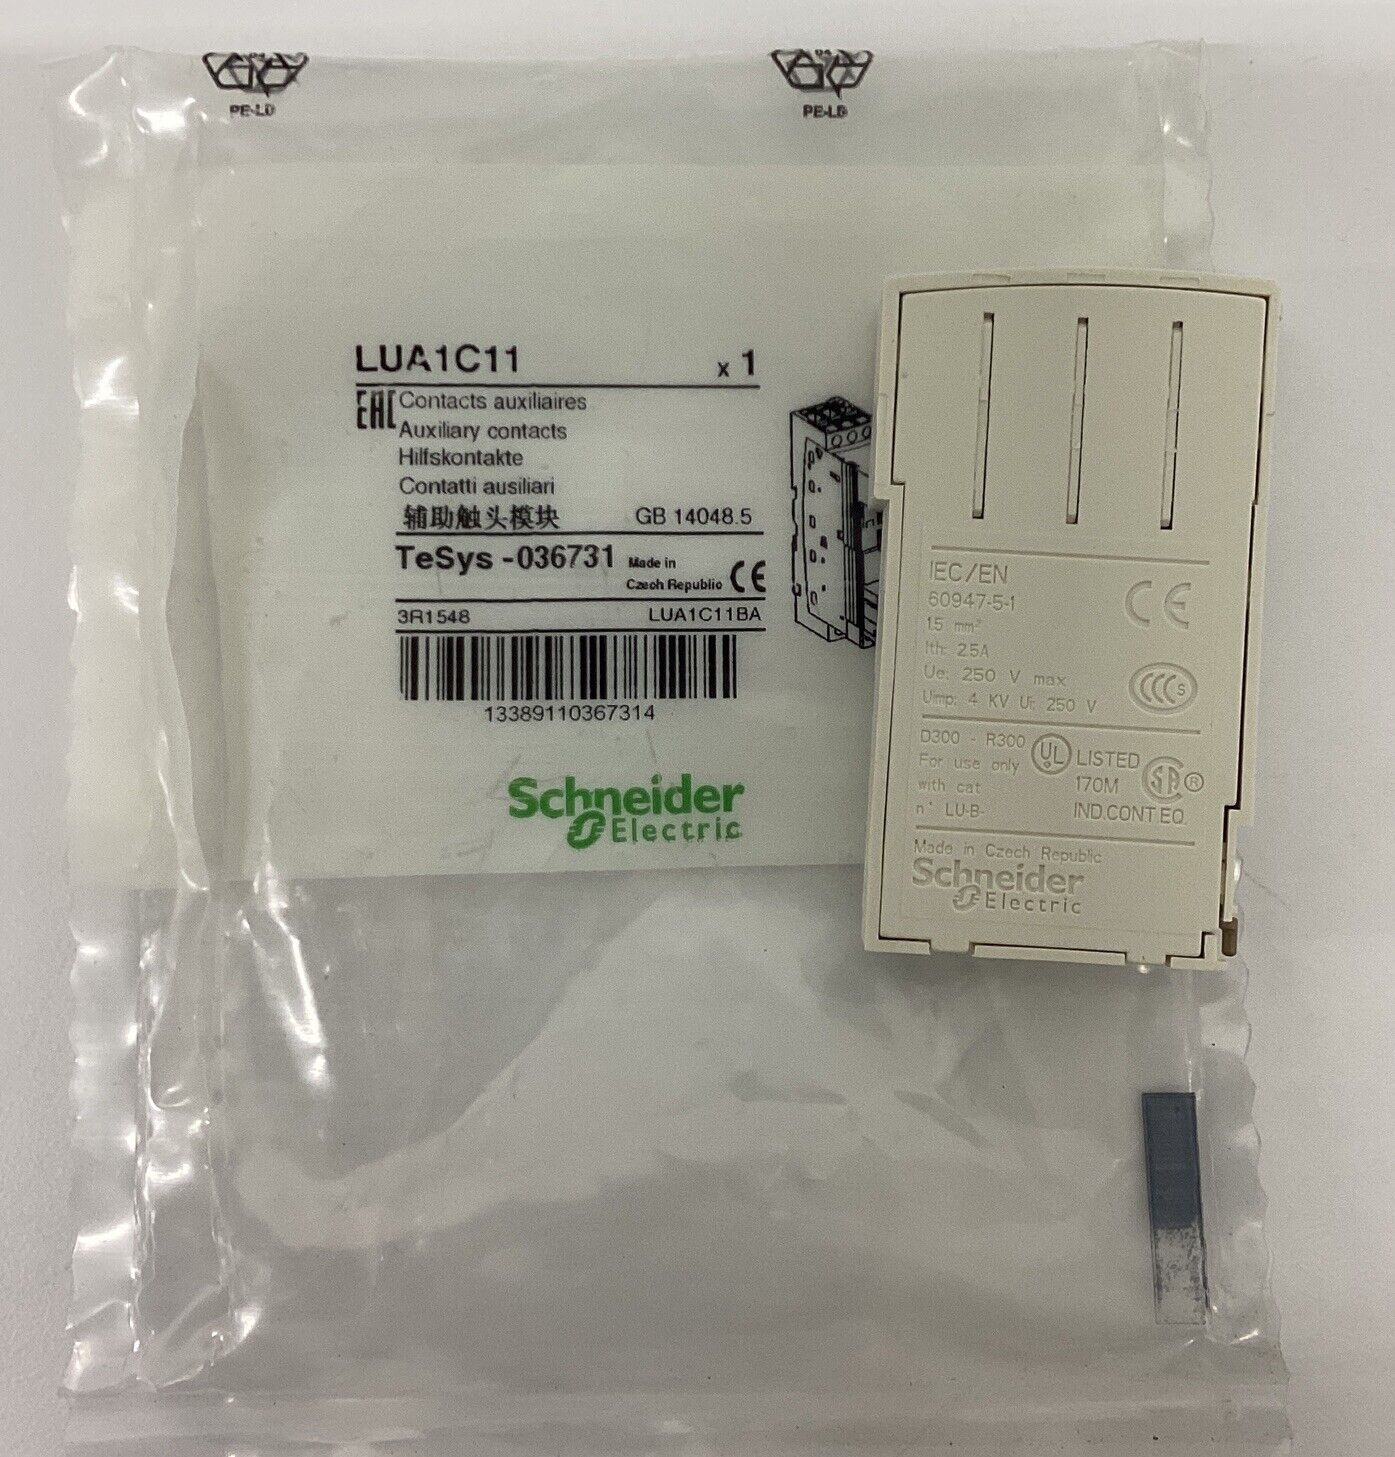 Schneider Electric  LUA1C11 Auxiliary Contact (BL286) - 0